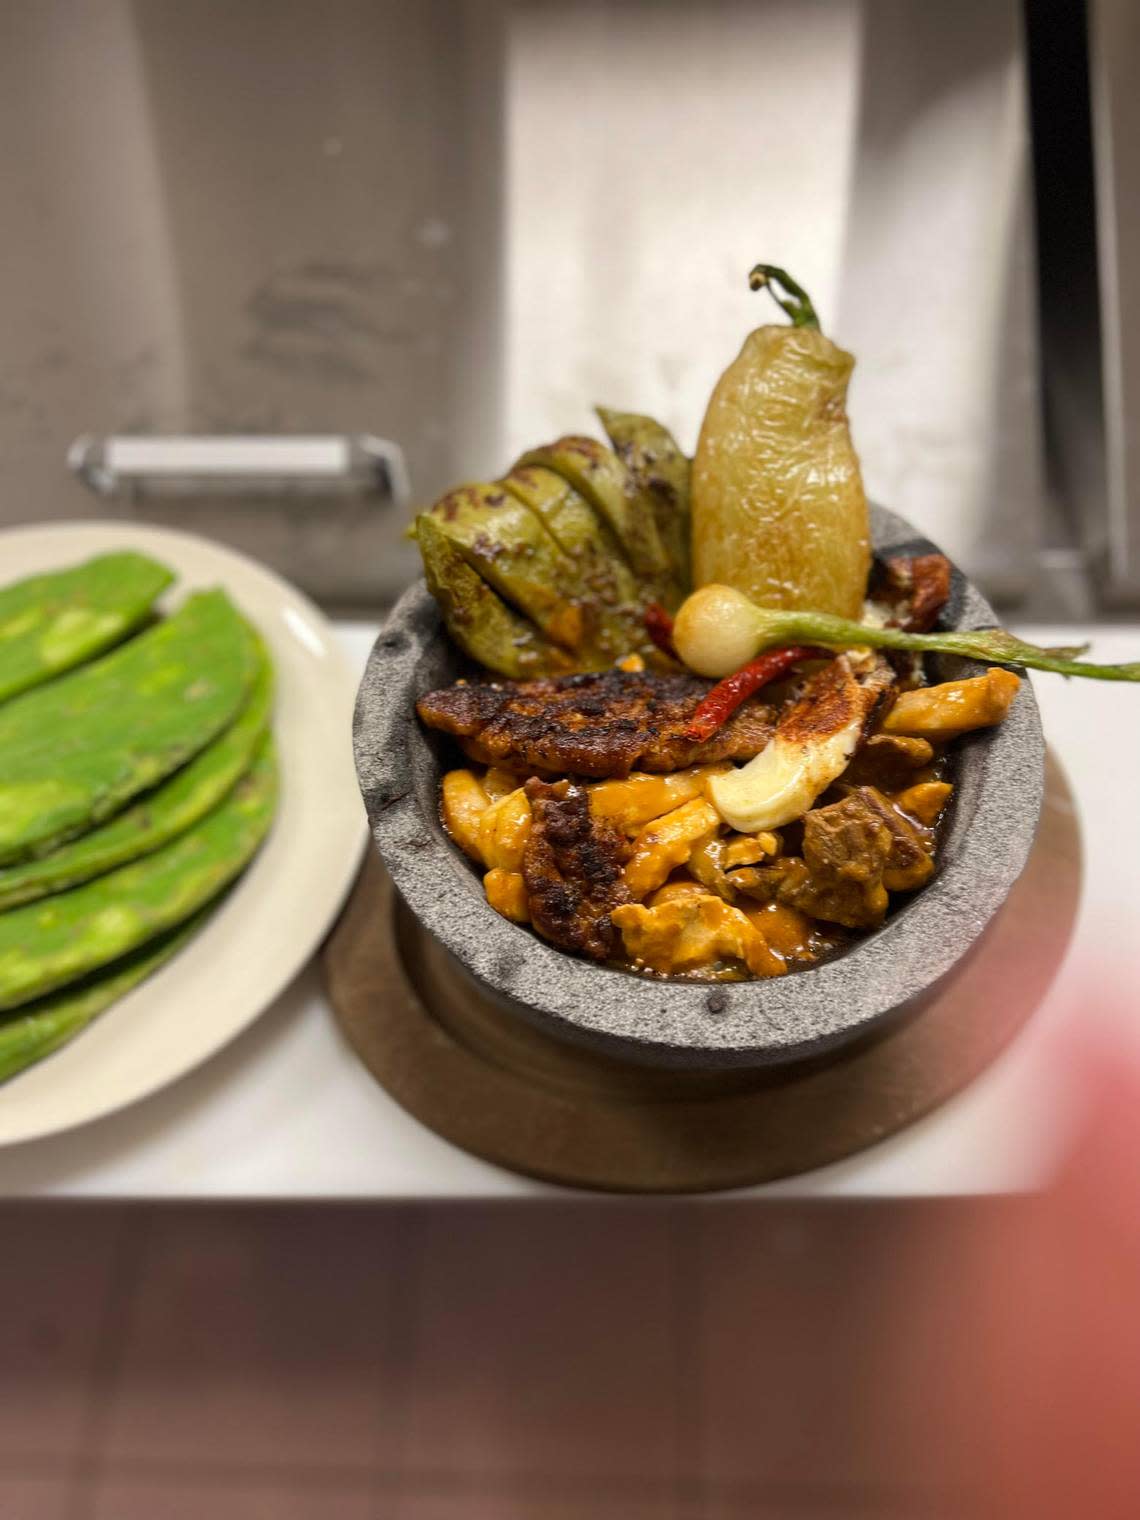 Molcajete, grilled Mexican cactus with grilled chicken, steak, chorizo (sausage), shrimp, fresh cheese and topped with the restaurant’s “special sauce.”